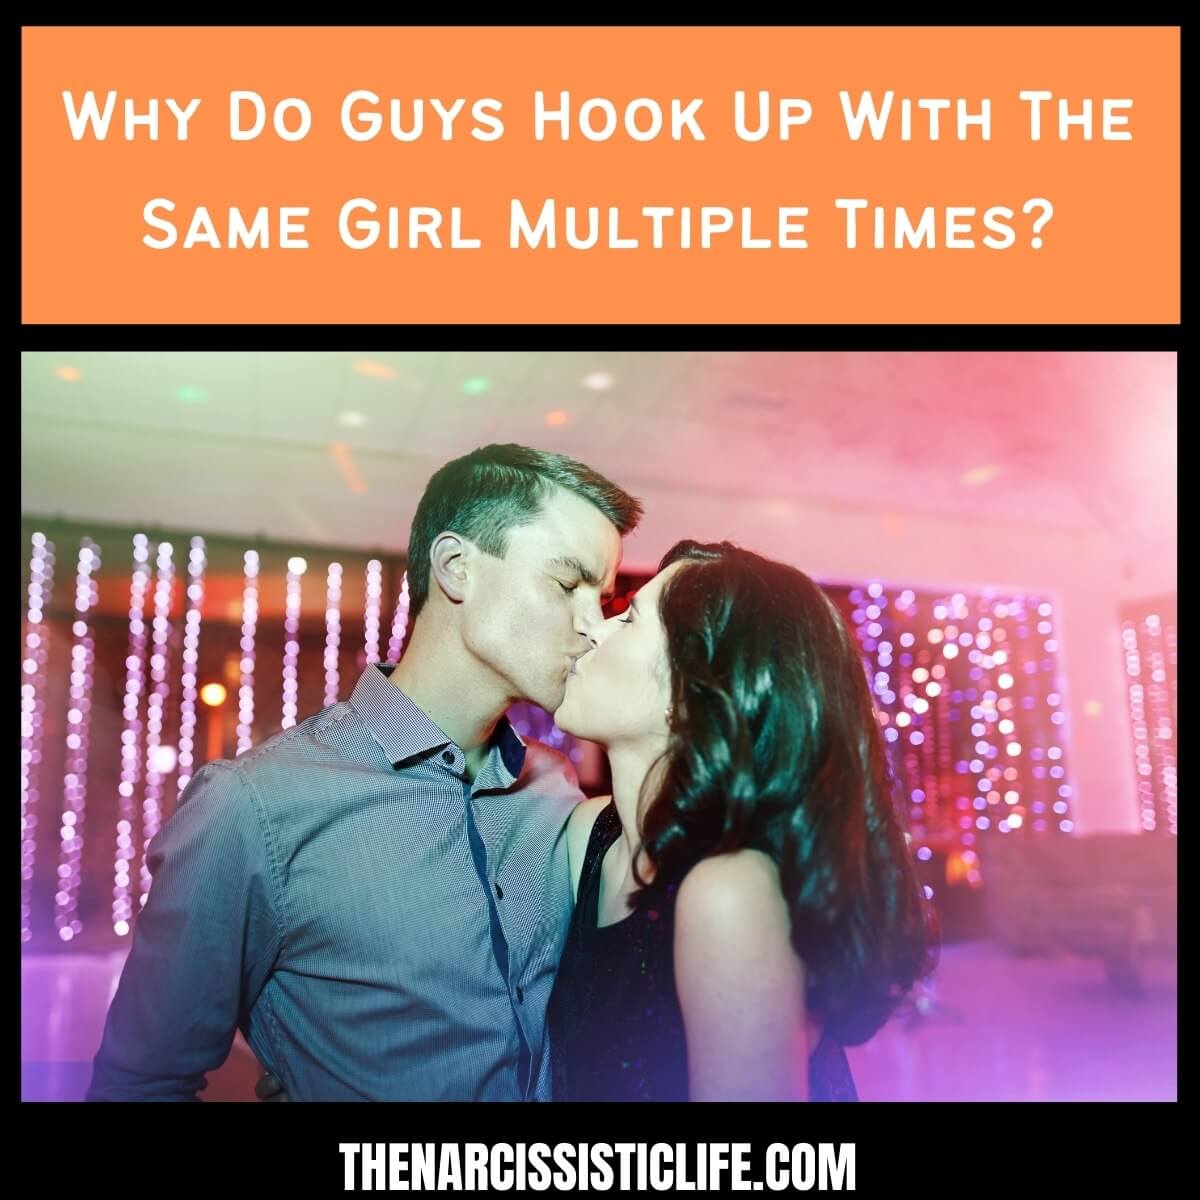 Why Do Guys Hook Up With The Same Girl Multiple Times?